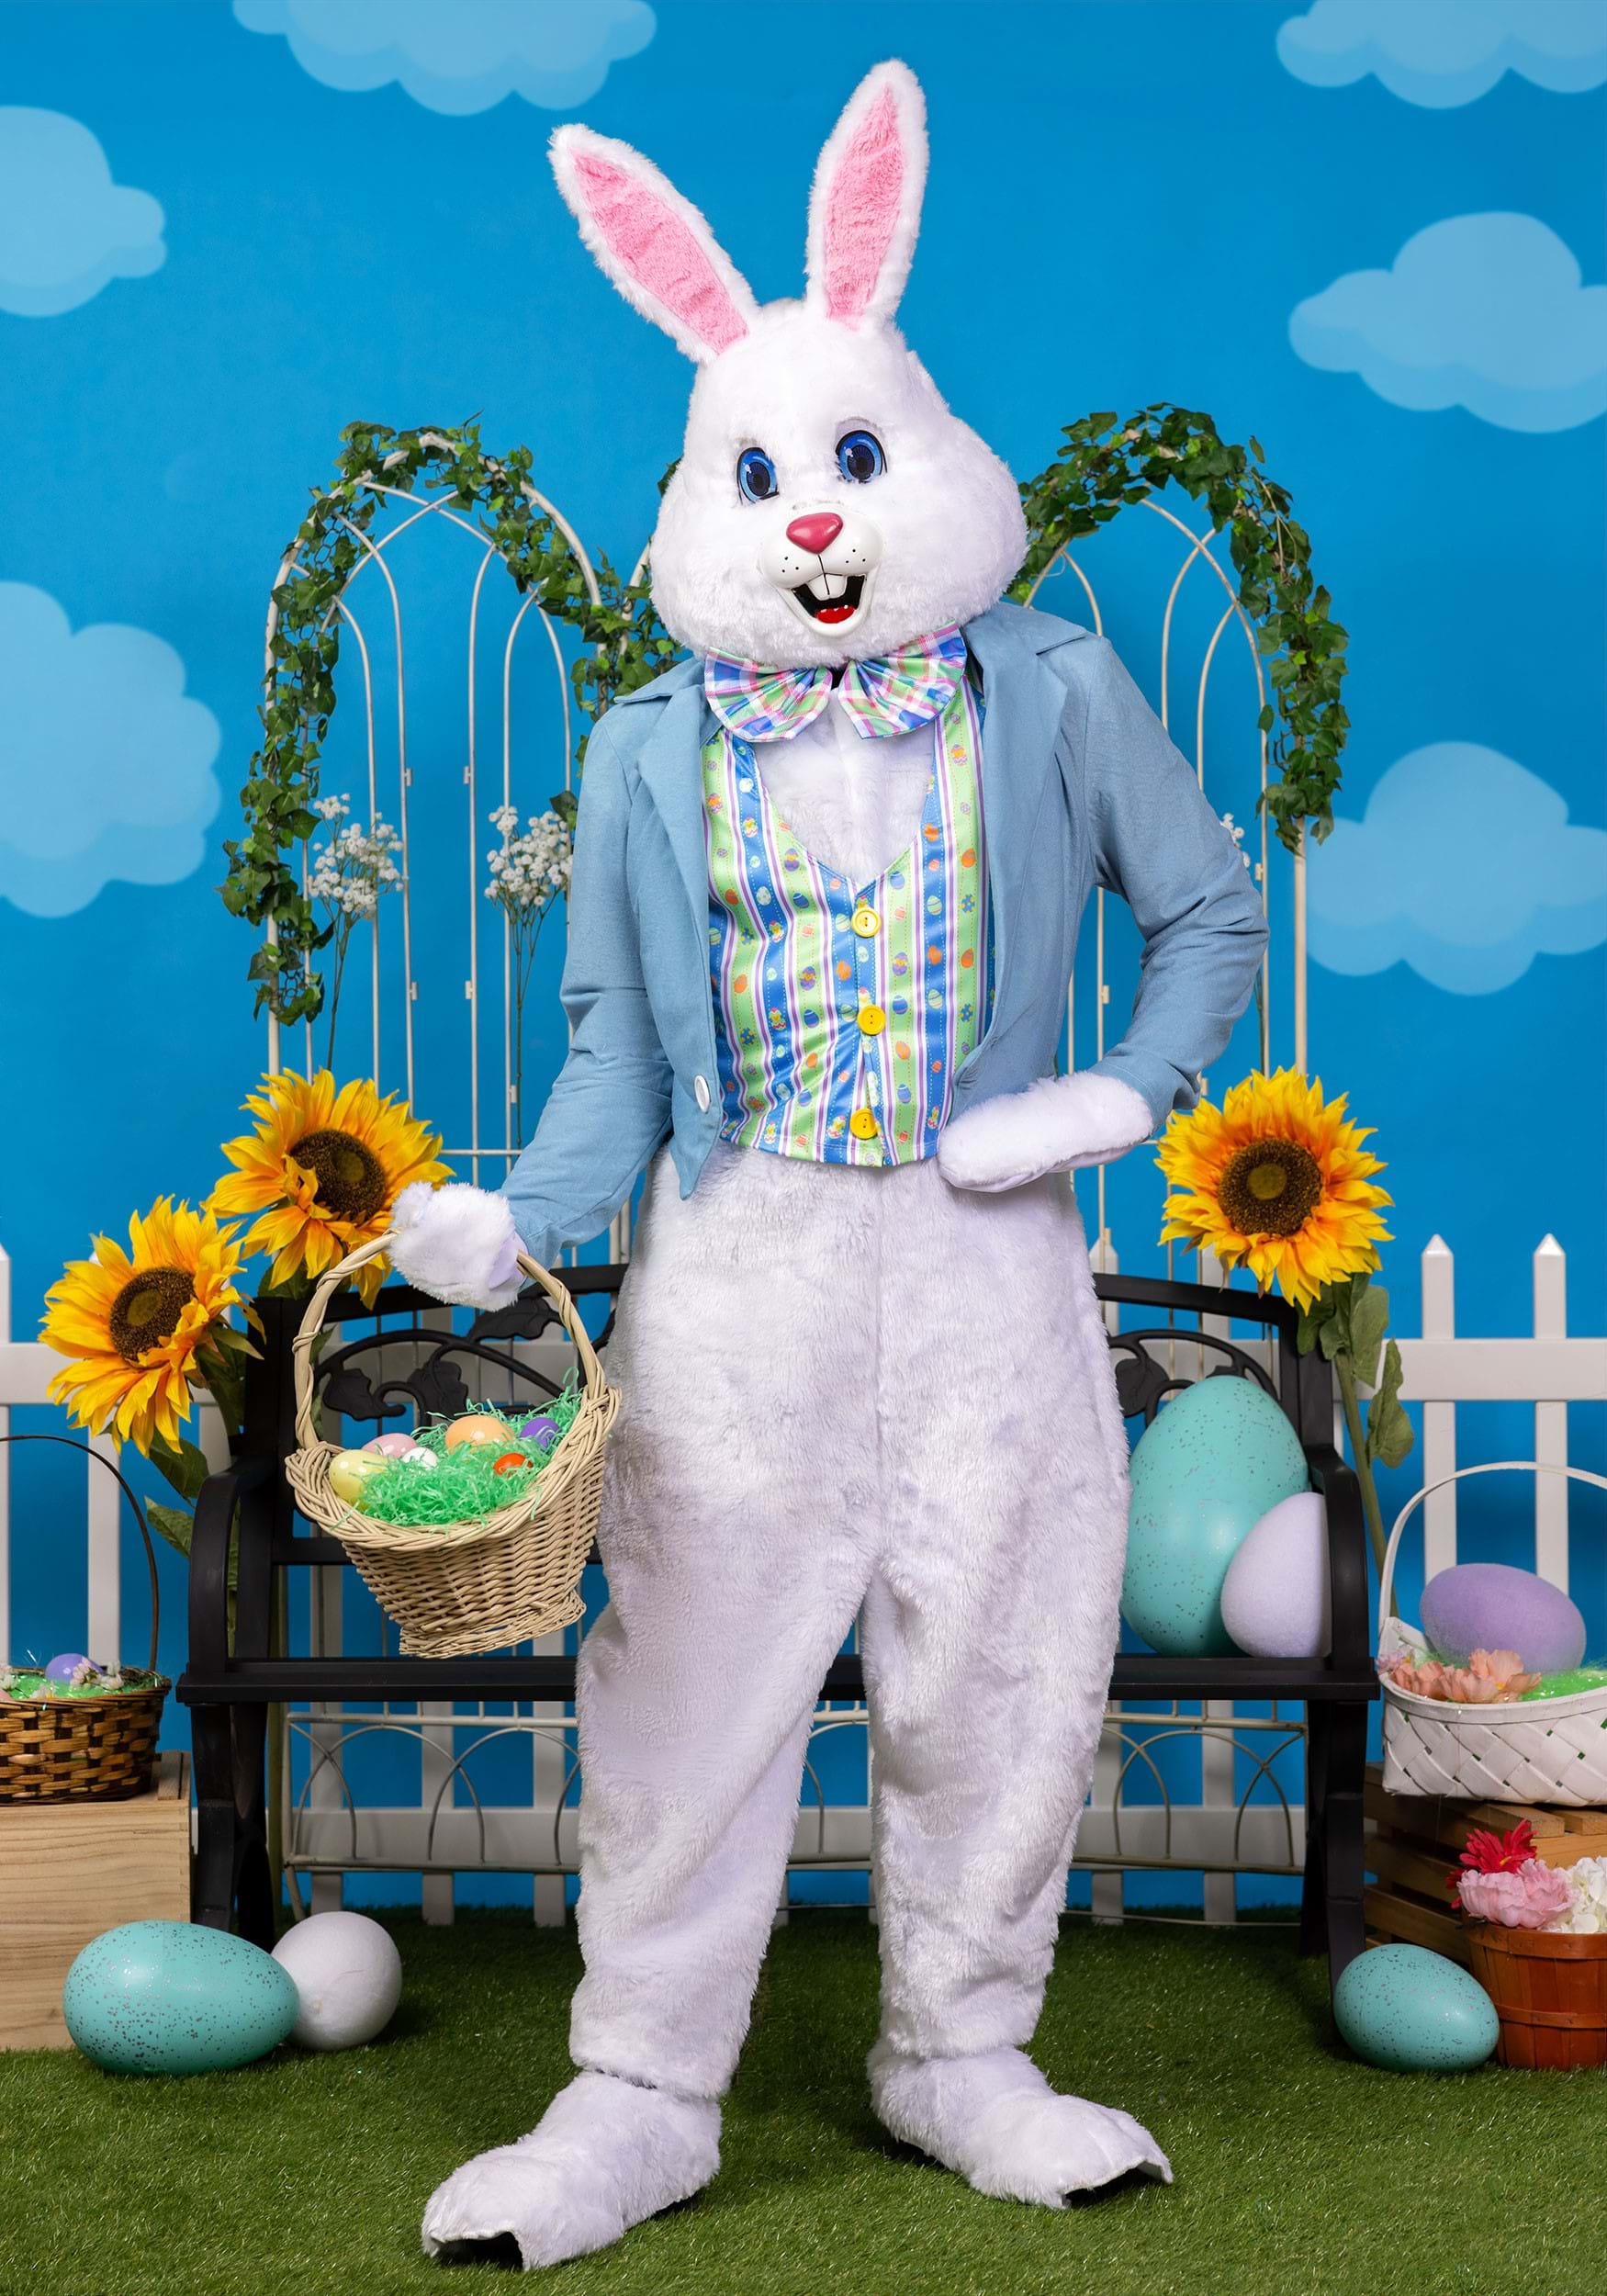 https://images.halloweencostumes.ca/products/30021/1-1/adult-deluxe-easter-bunny-costume.jpg